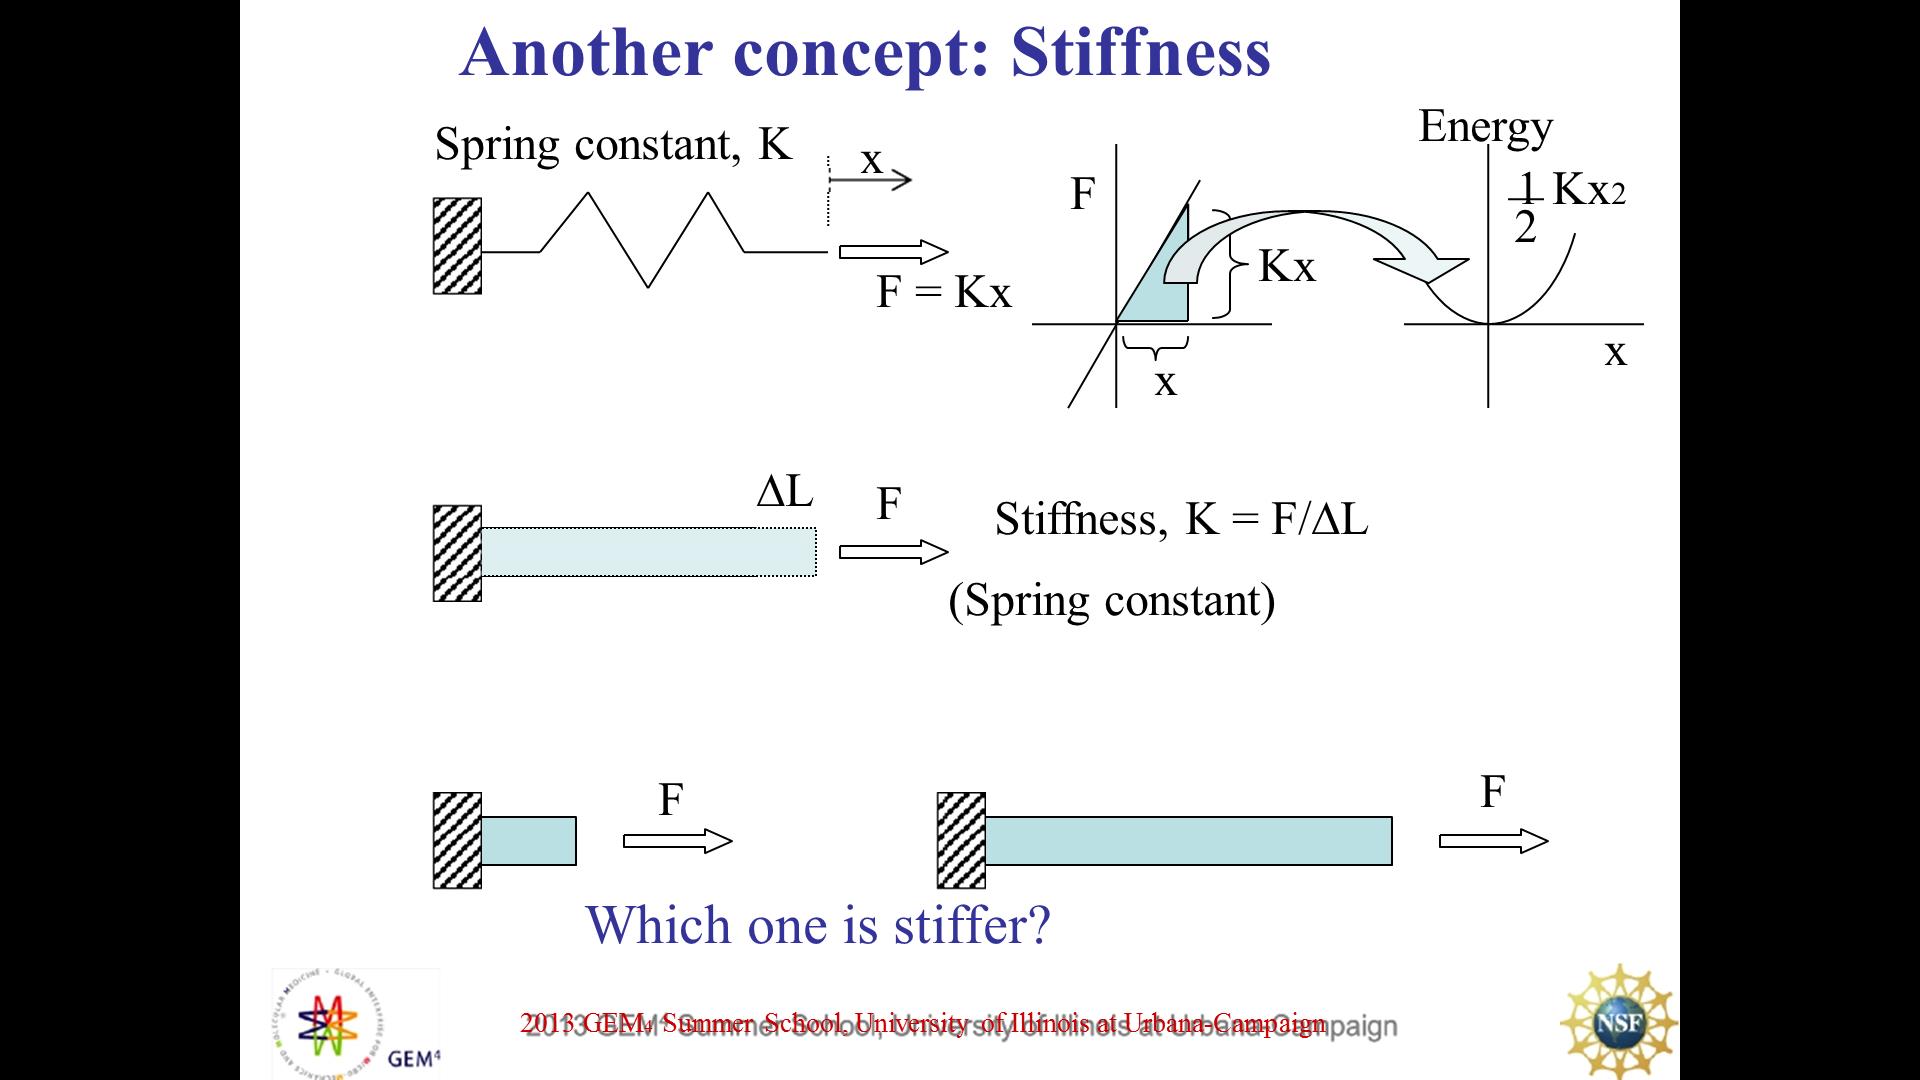 Another concept: Stiffness